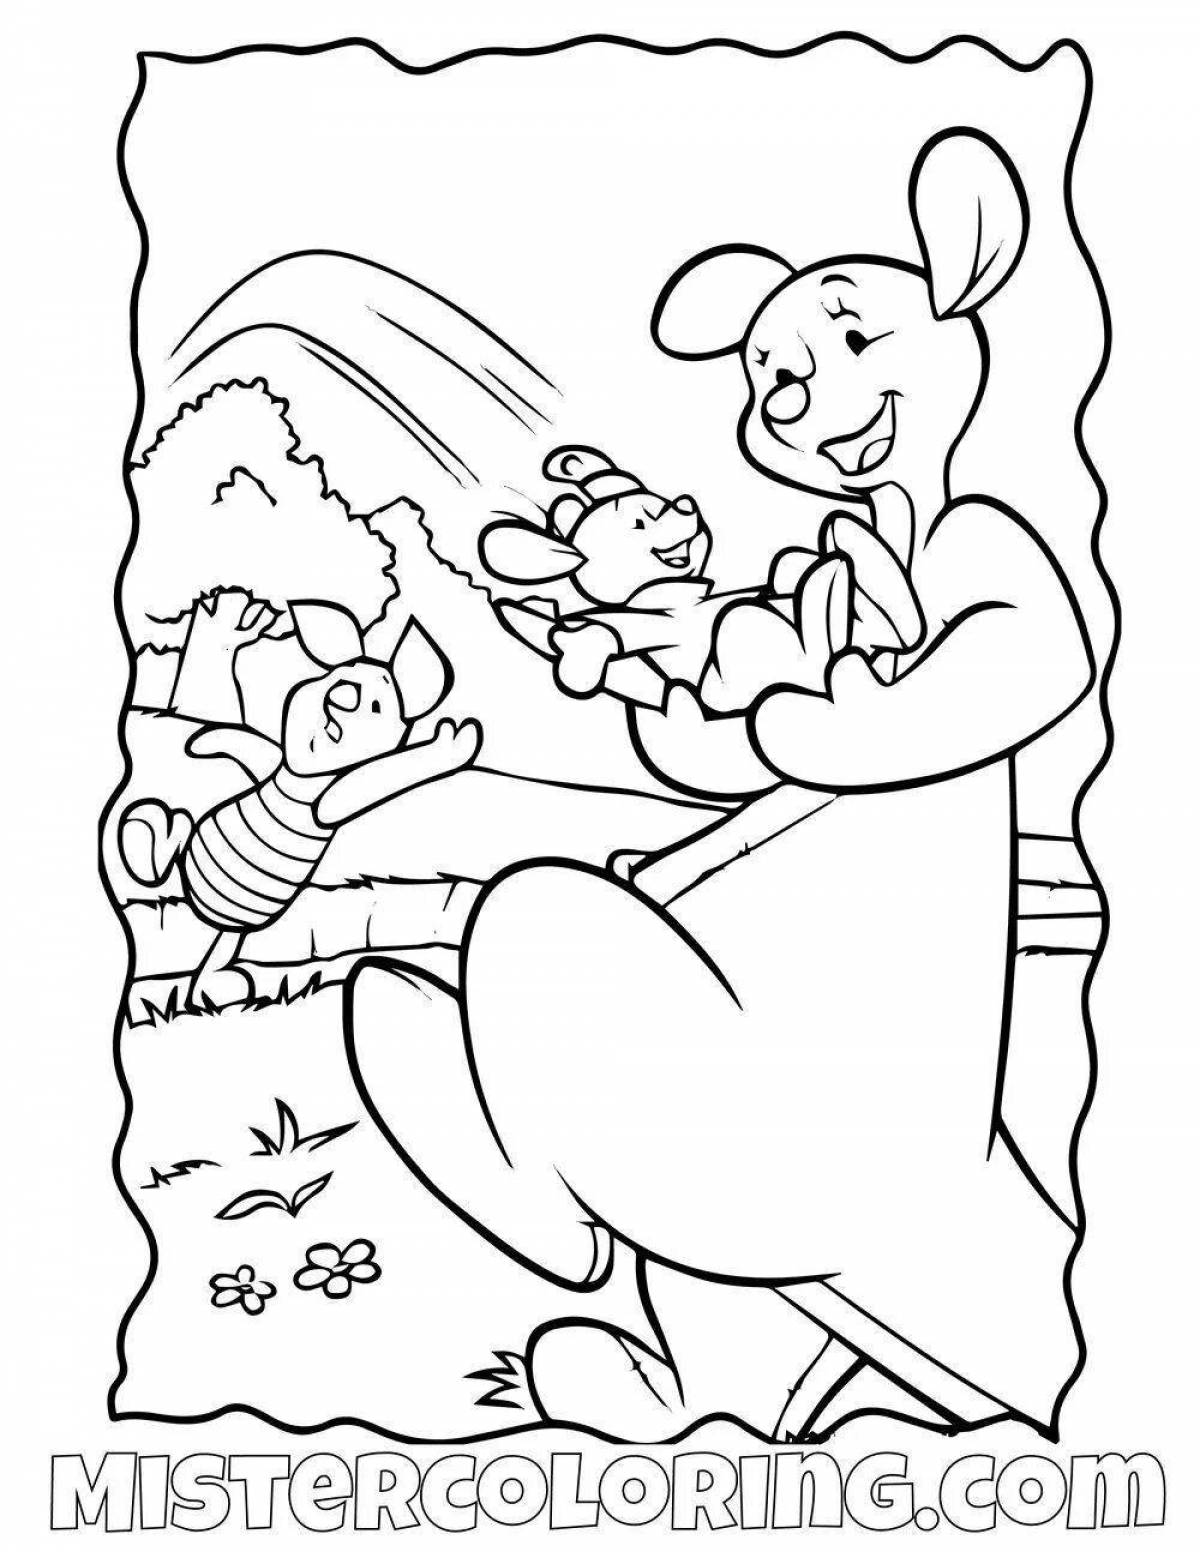 Color-frenzy pound coloring page for kids